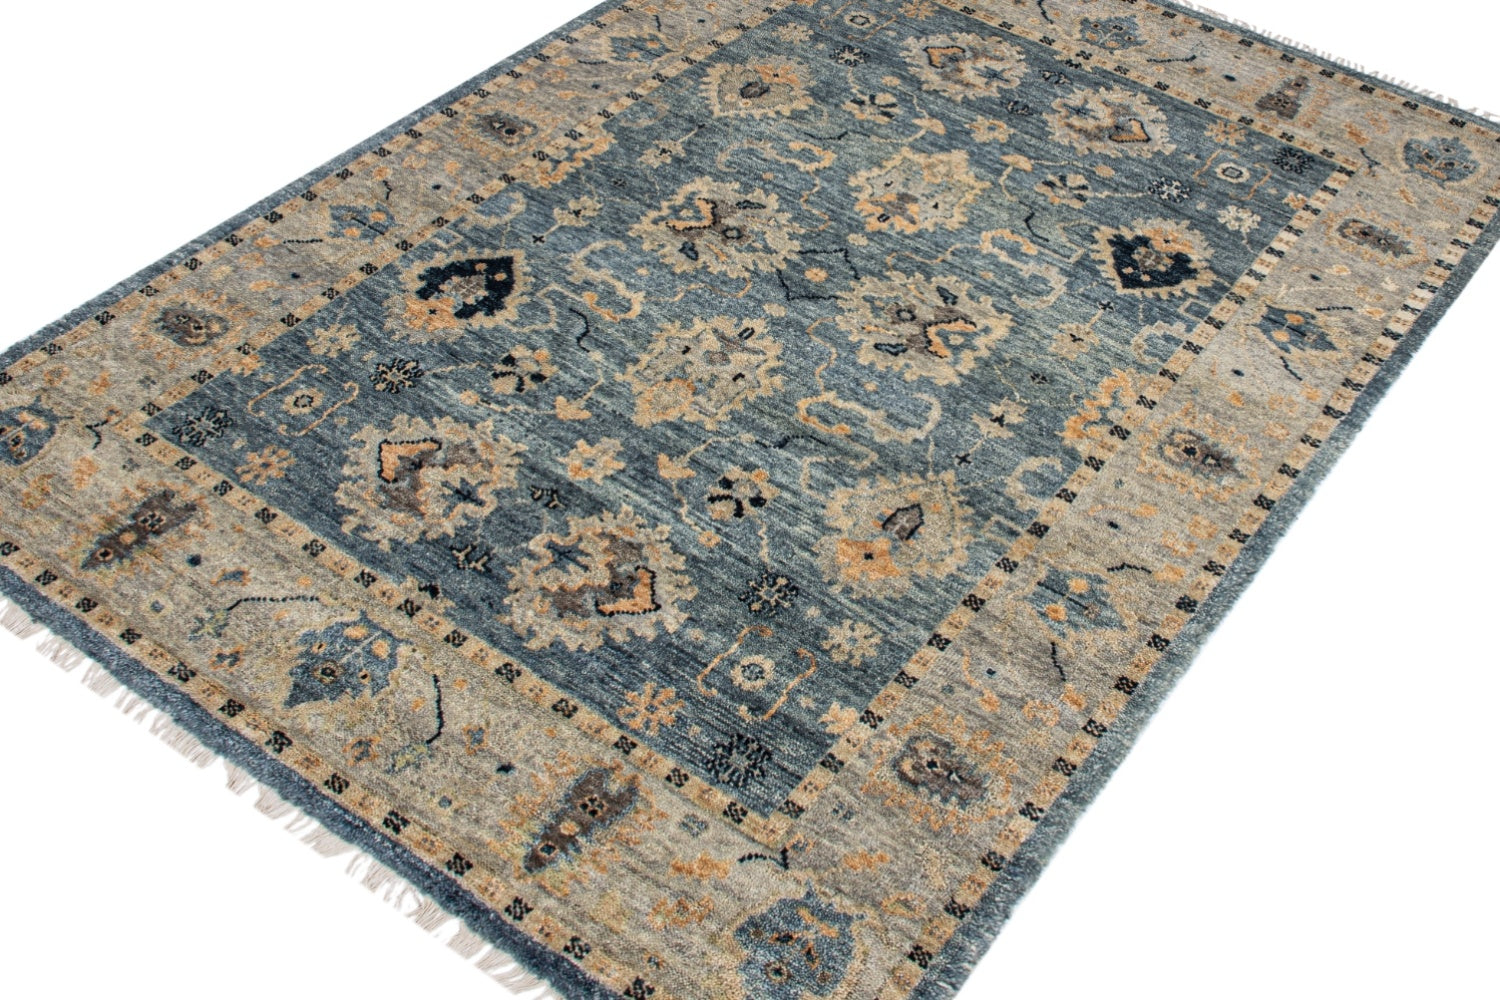 Sultanabad 5 Handwoven Traditional Rug, J72598